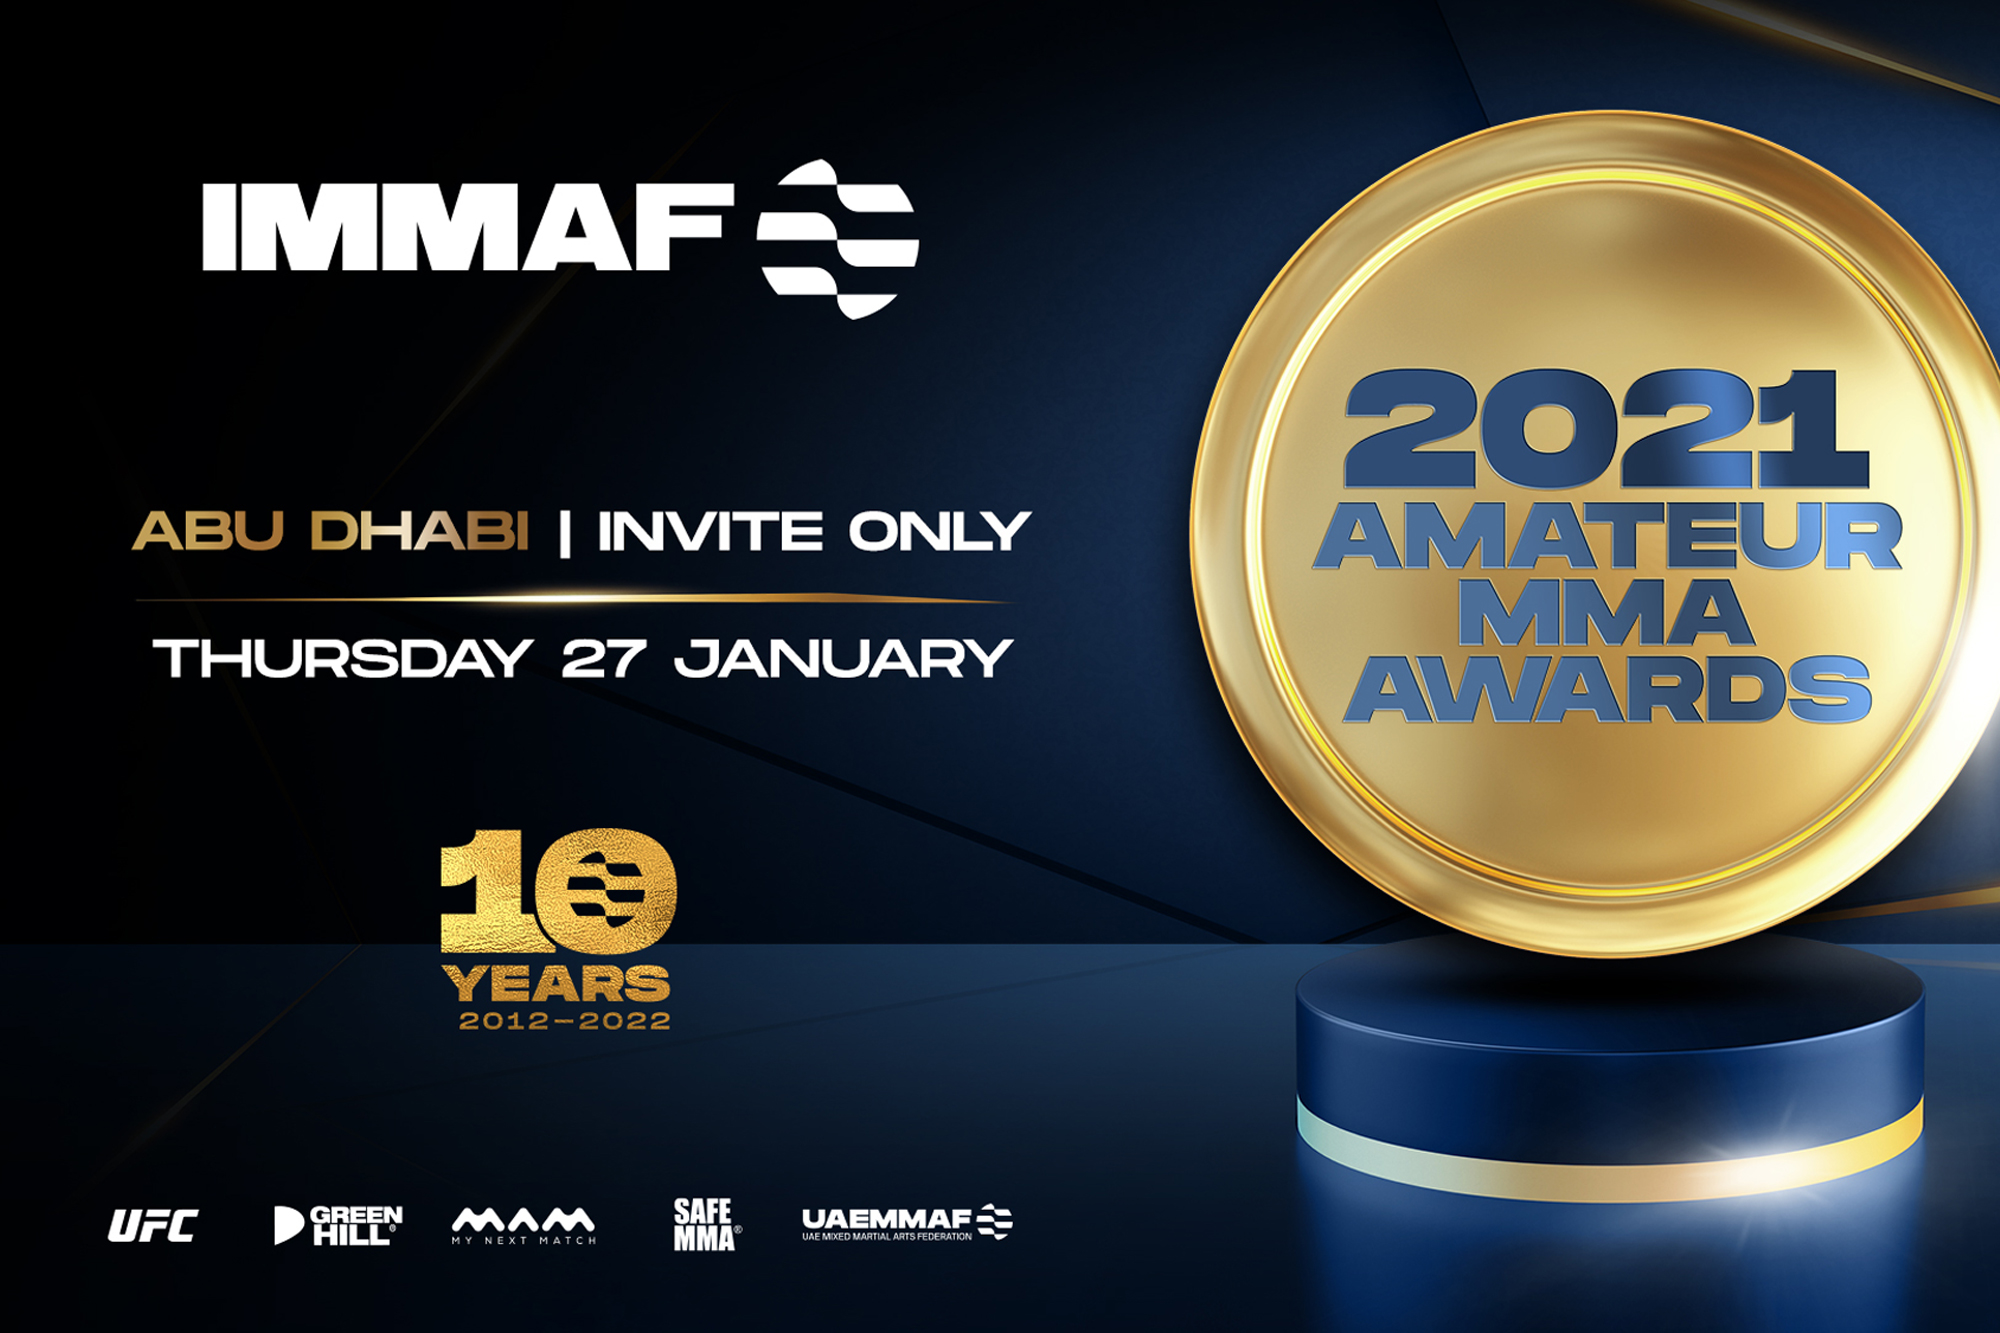 Best in Amateur MMA awarded in IMMAF ceremony in Abu Dhabi